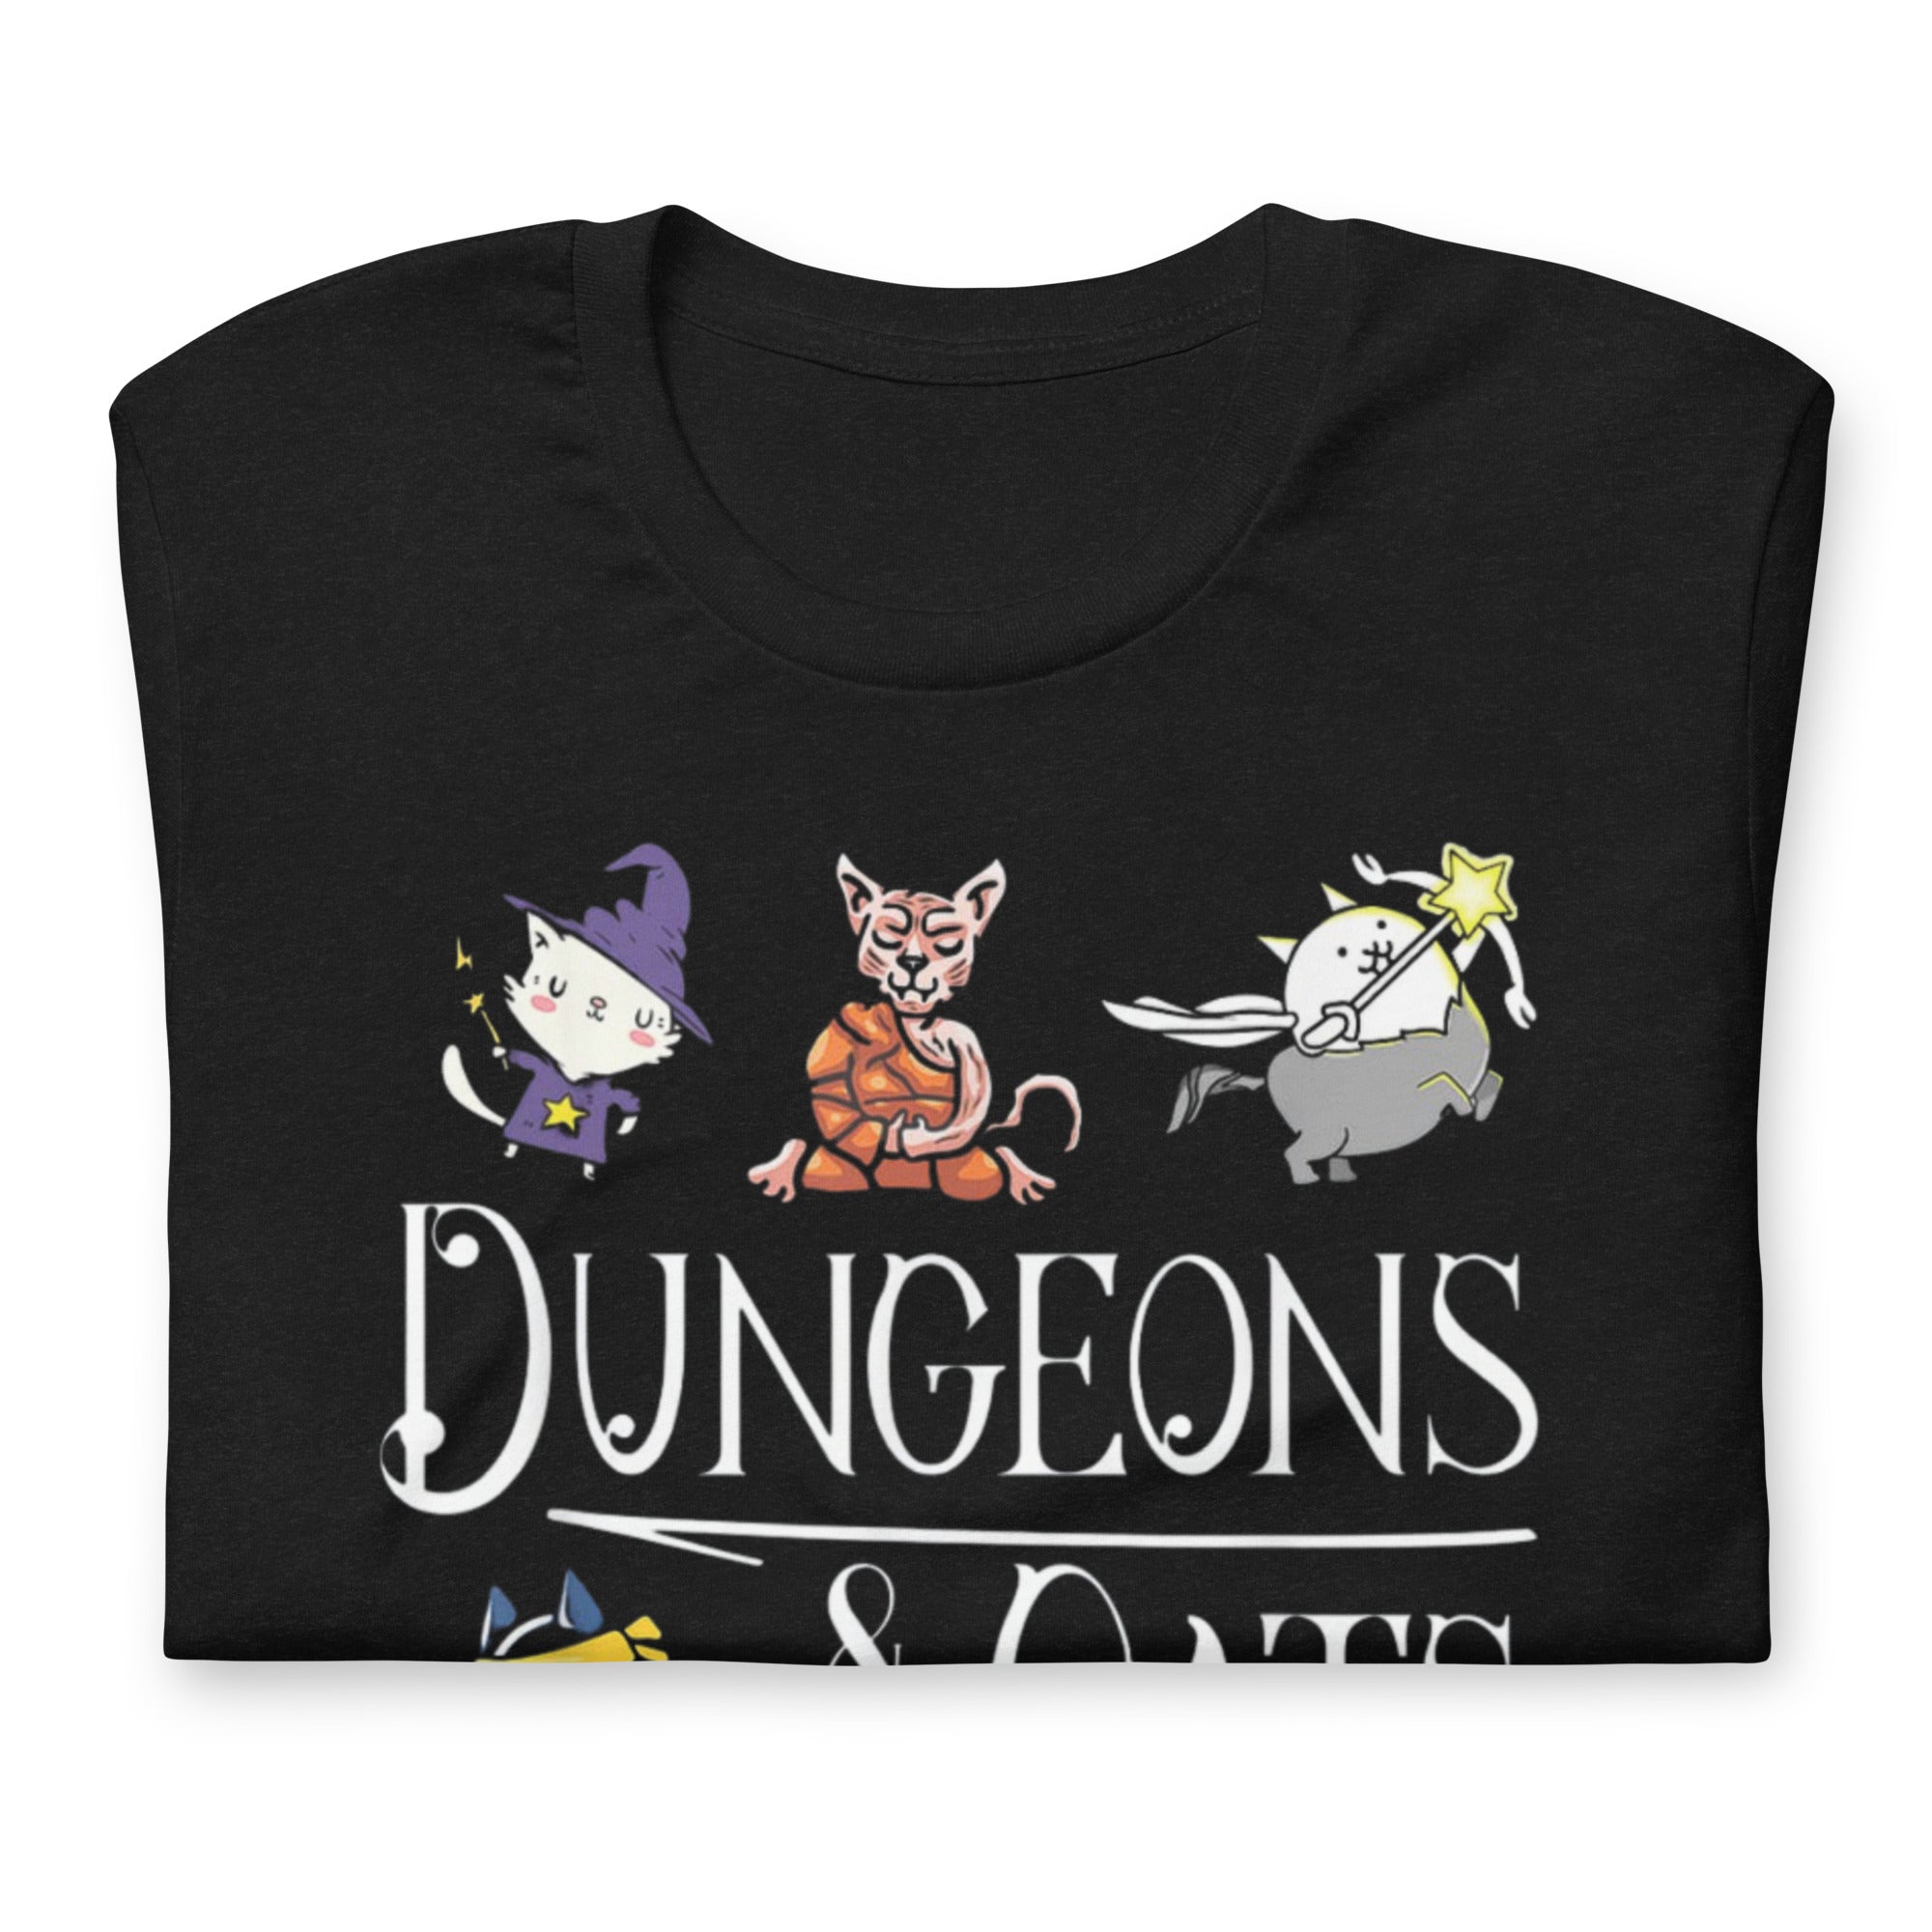 Dungeons and Cats shirt